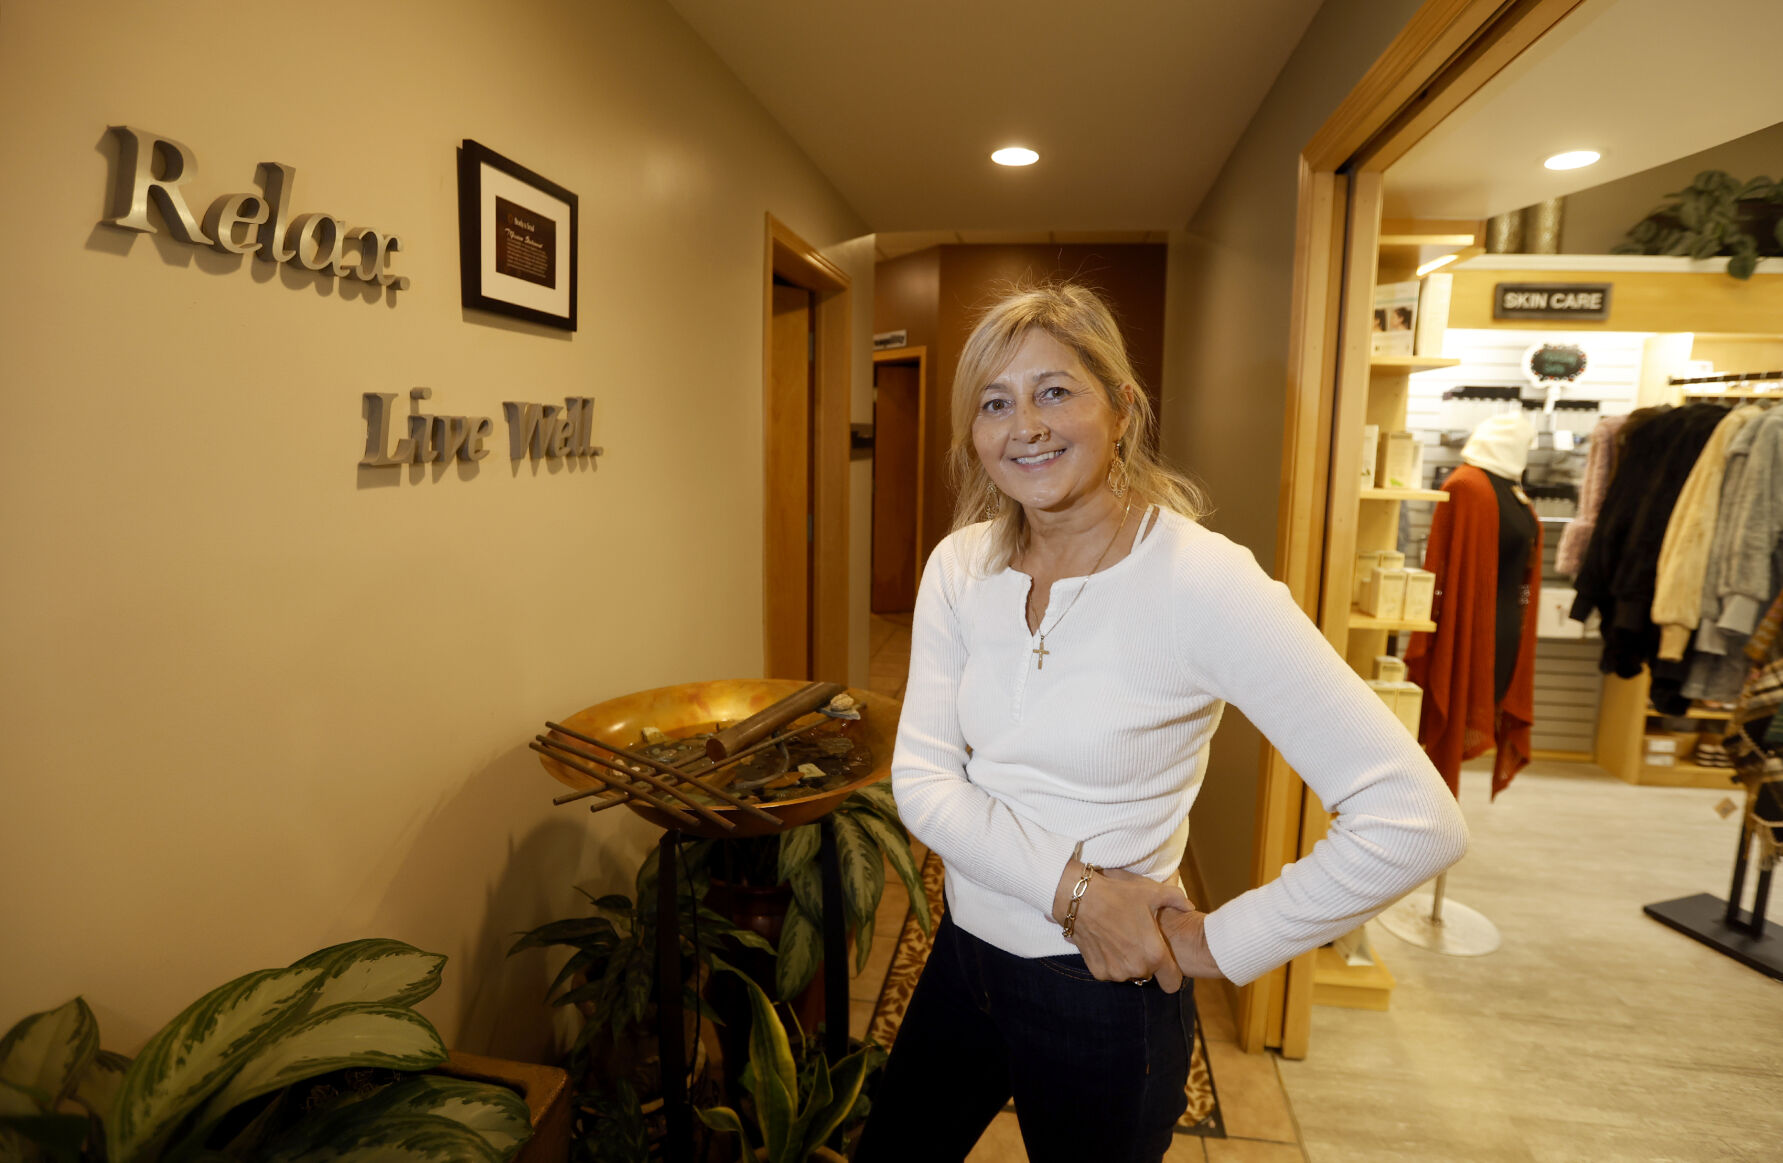 Julia Theisen owns Body & Soul Wellness Center and Spa in Dubuque.    PHOTO CREDIT: Jessica Reilly